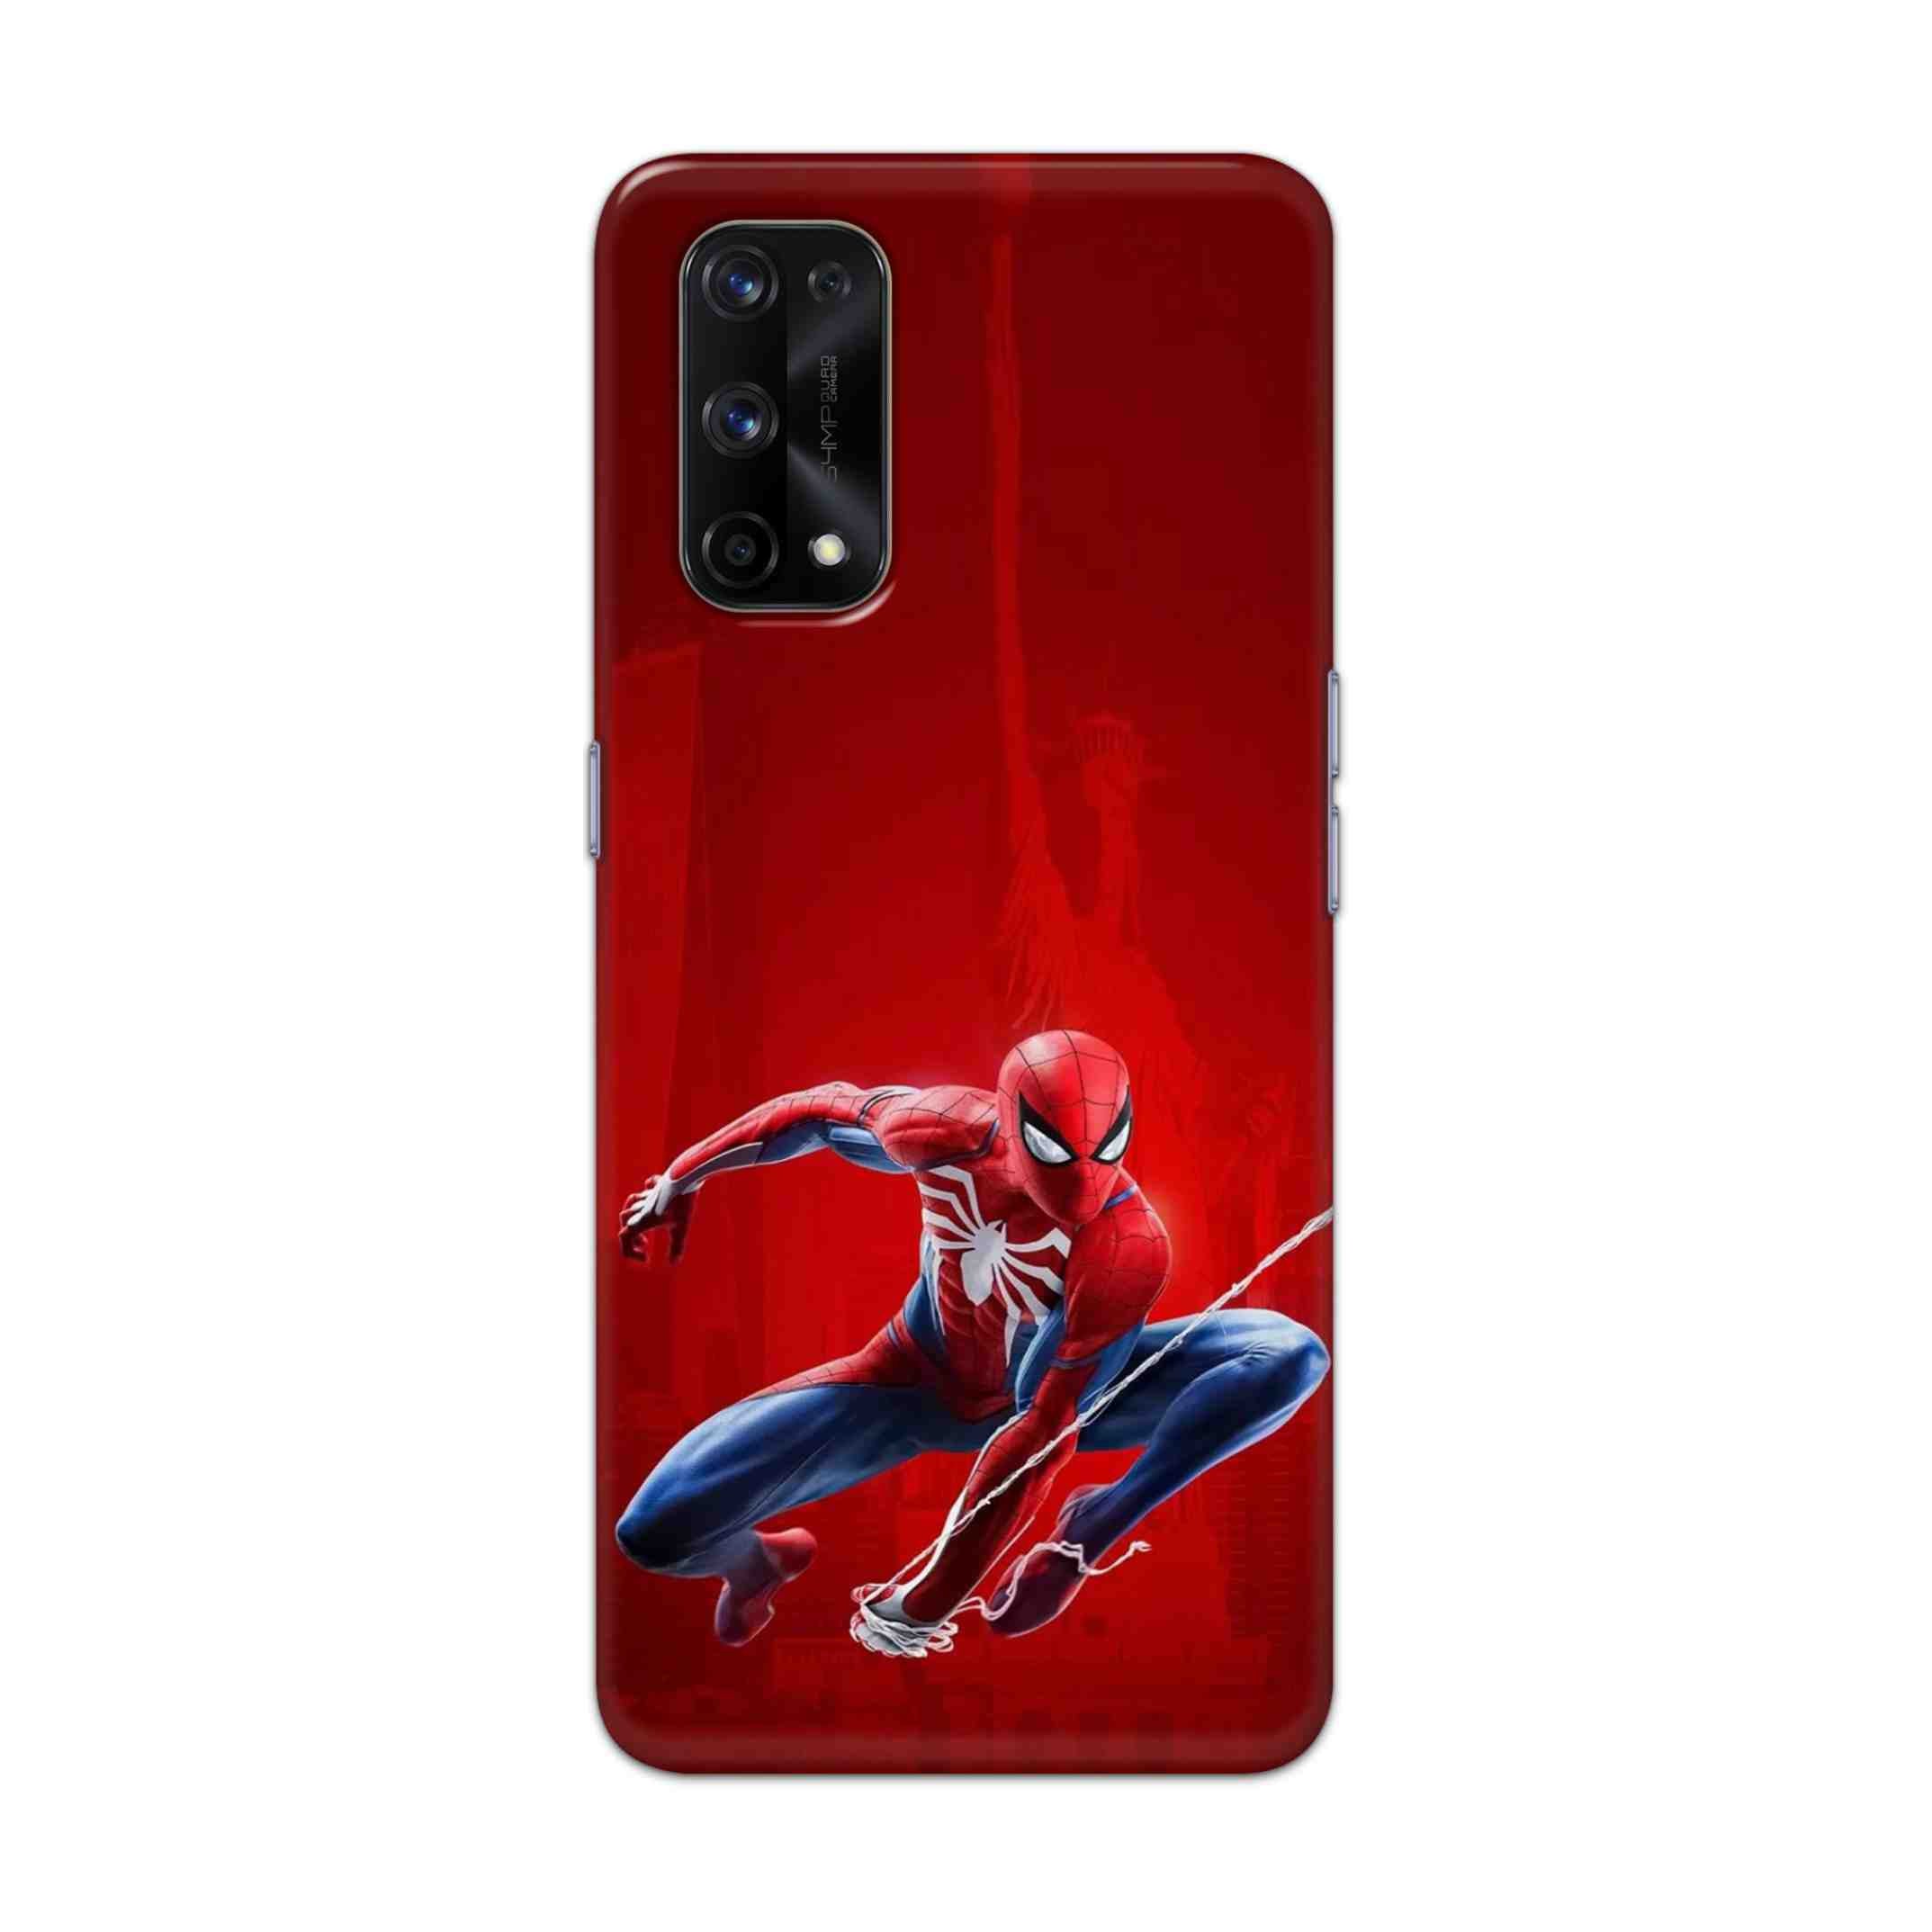 Buy Spiderman Hard Back Mobile Phone Case Cover For Realme X7 Pro Online